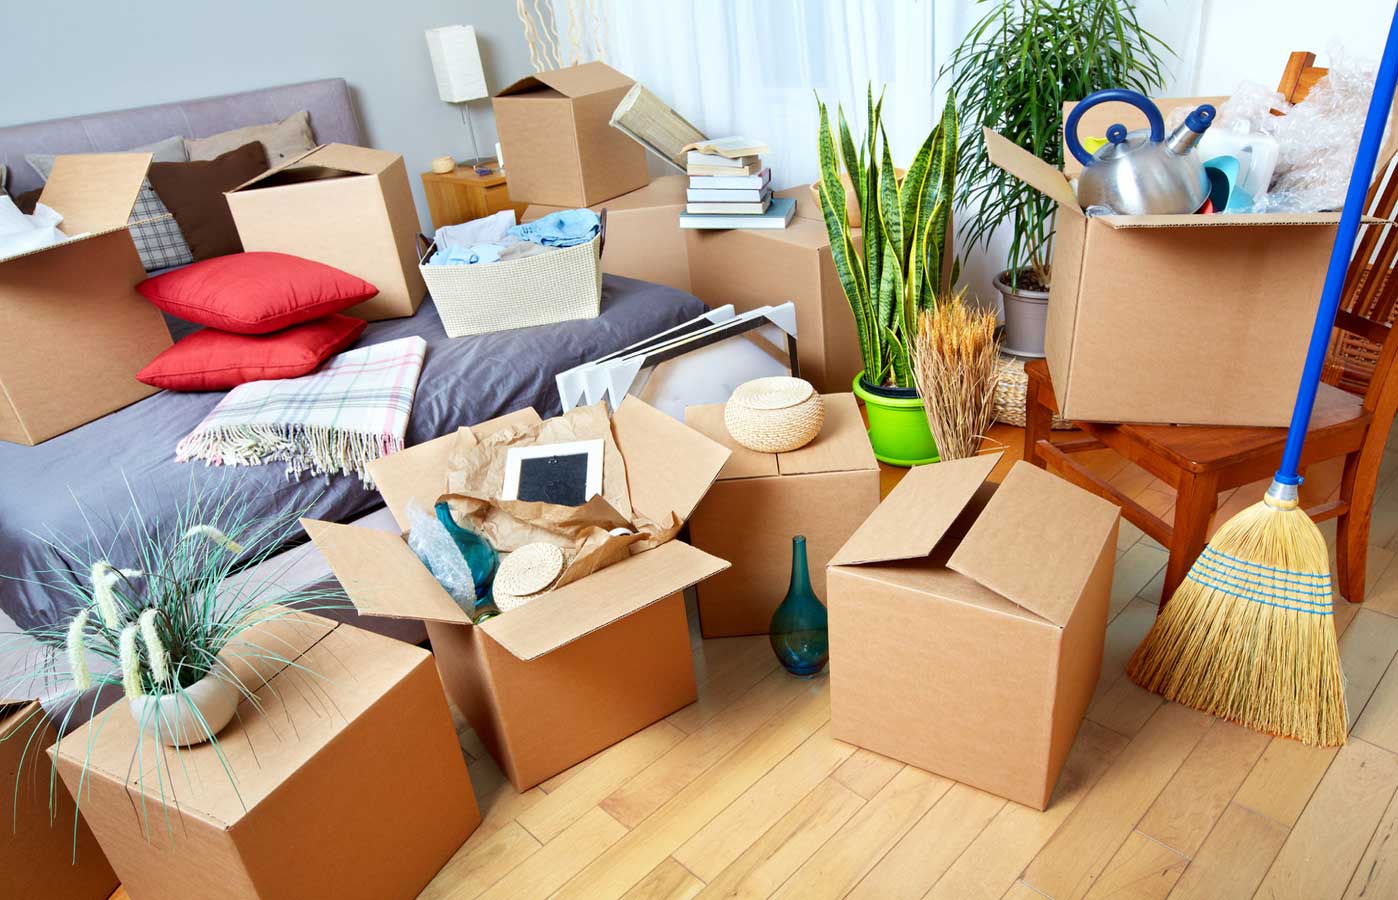 The 20 Best Packing Tips for Moving: Expert Packing Advice